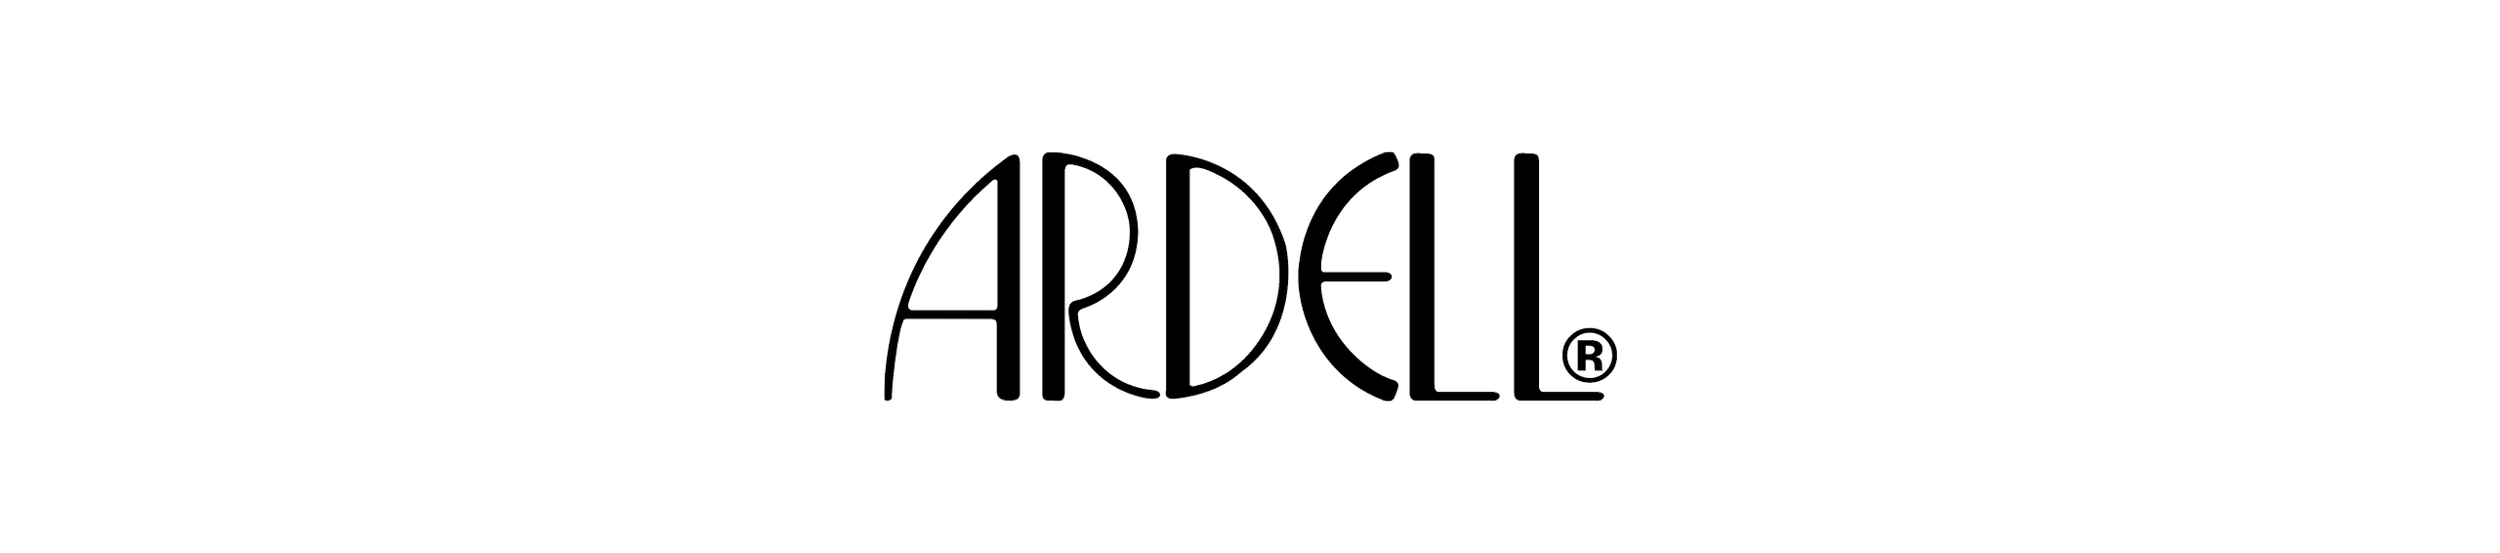 ARDELL-LOGO.png